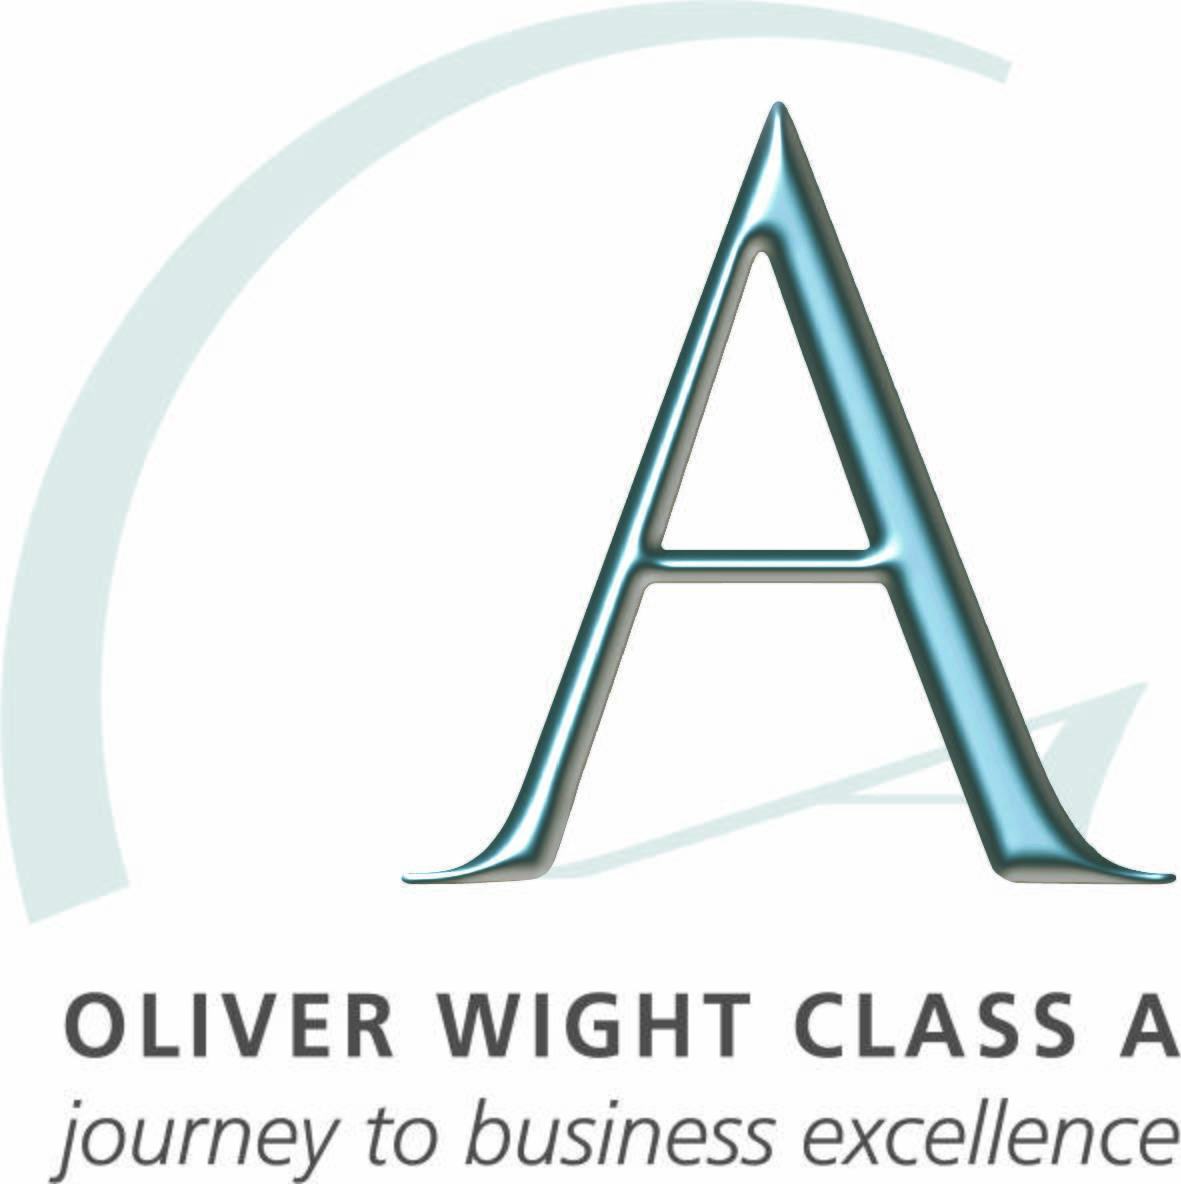 OLIVER WIGHT CLASS A AWARD